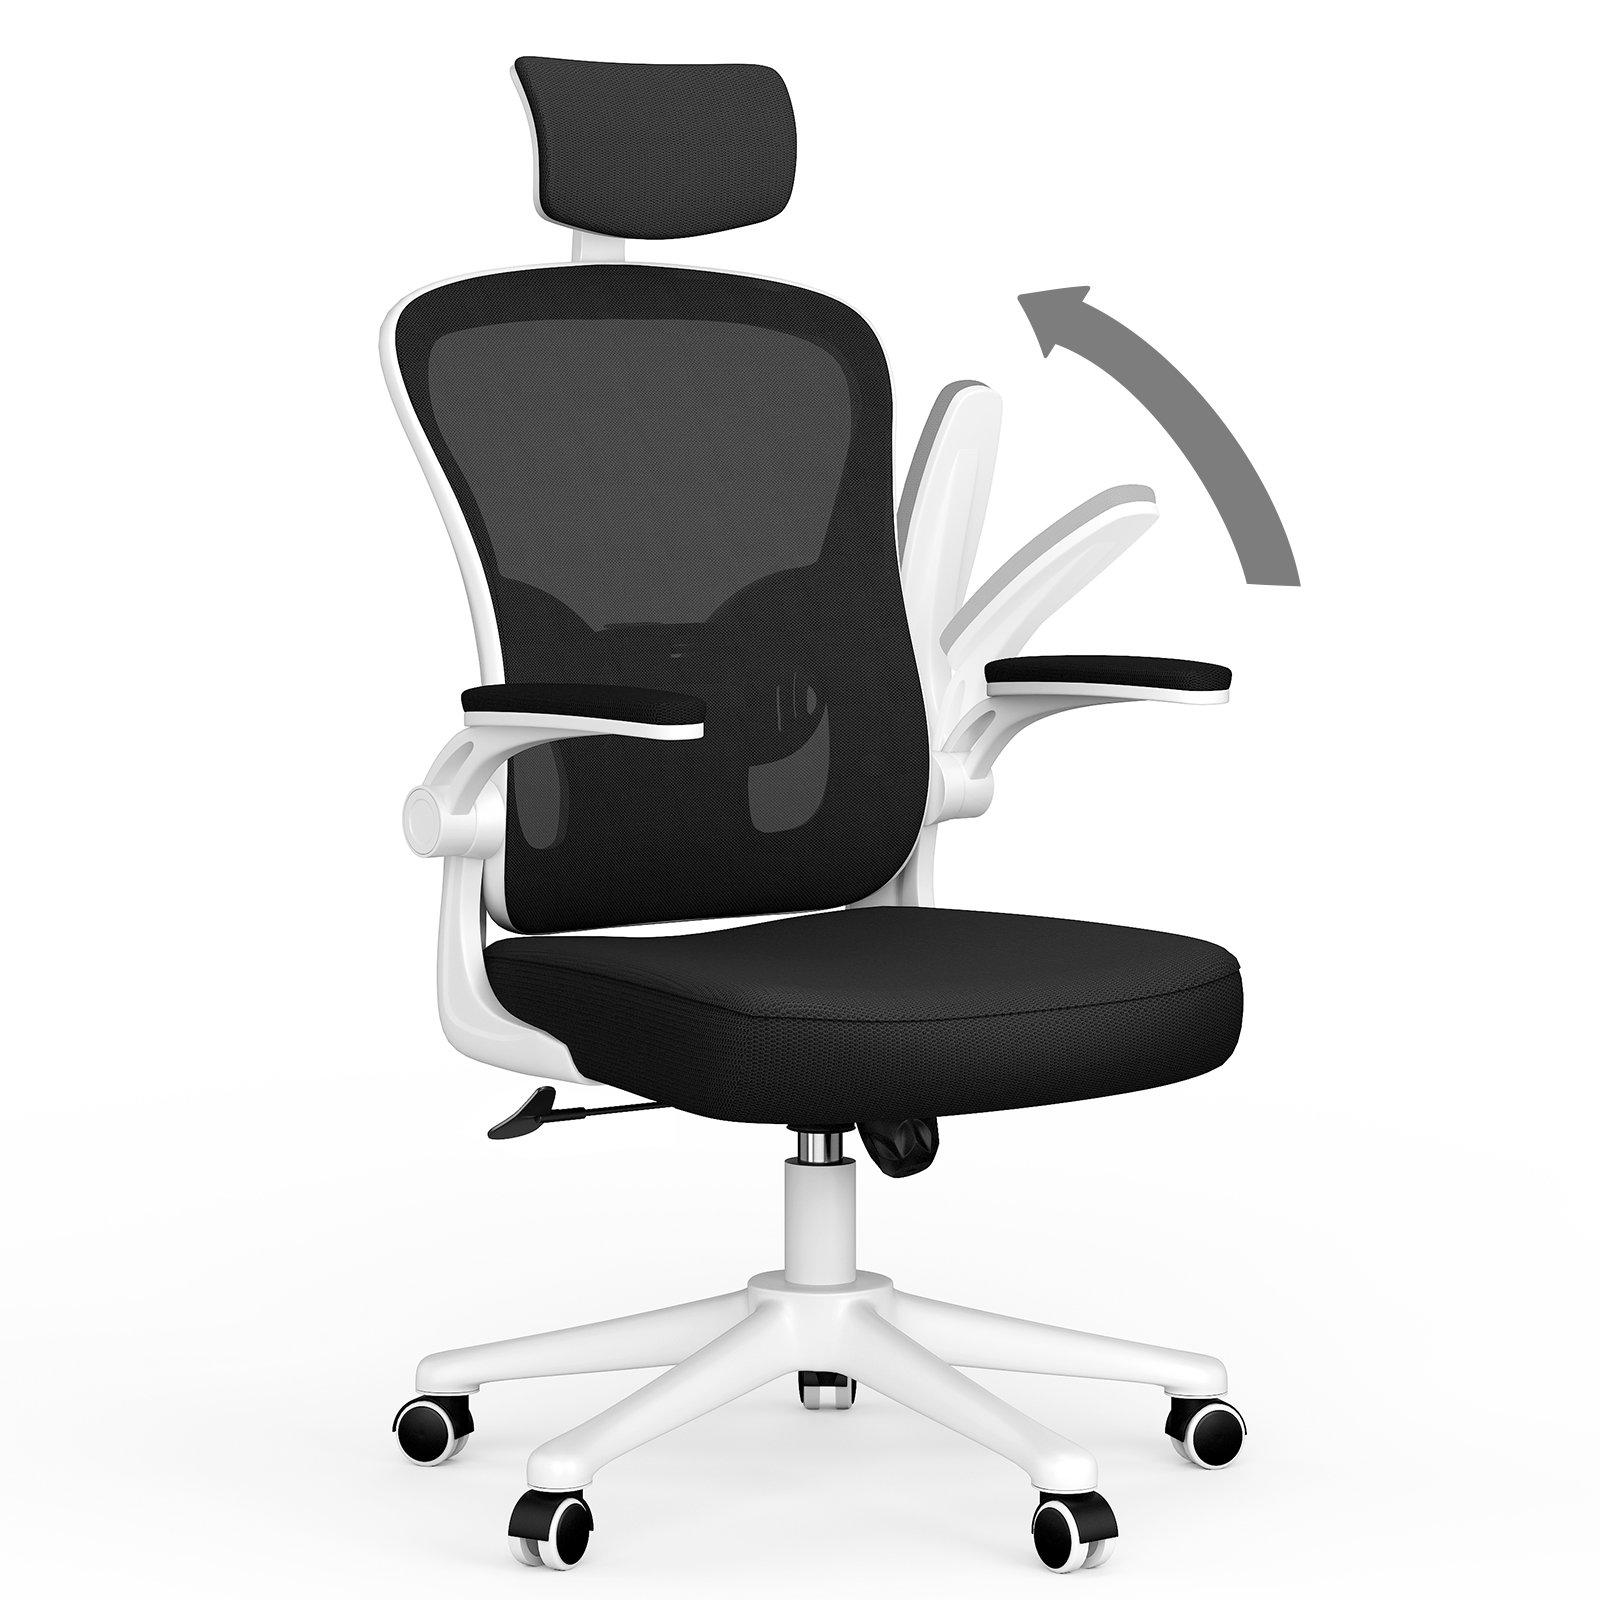 Ergonomic Office Chair with Headrest and Adjustable Armrests